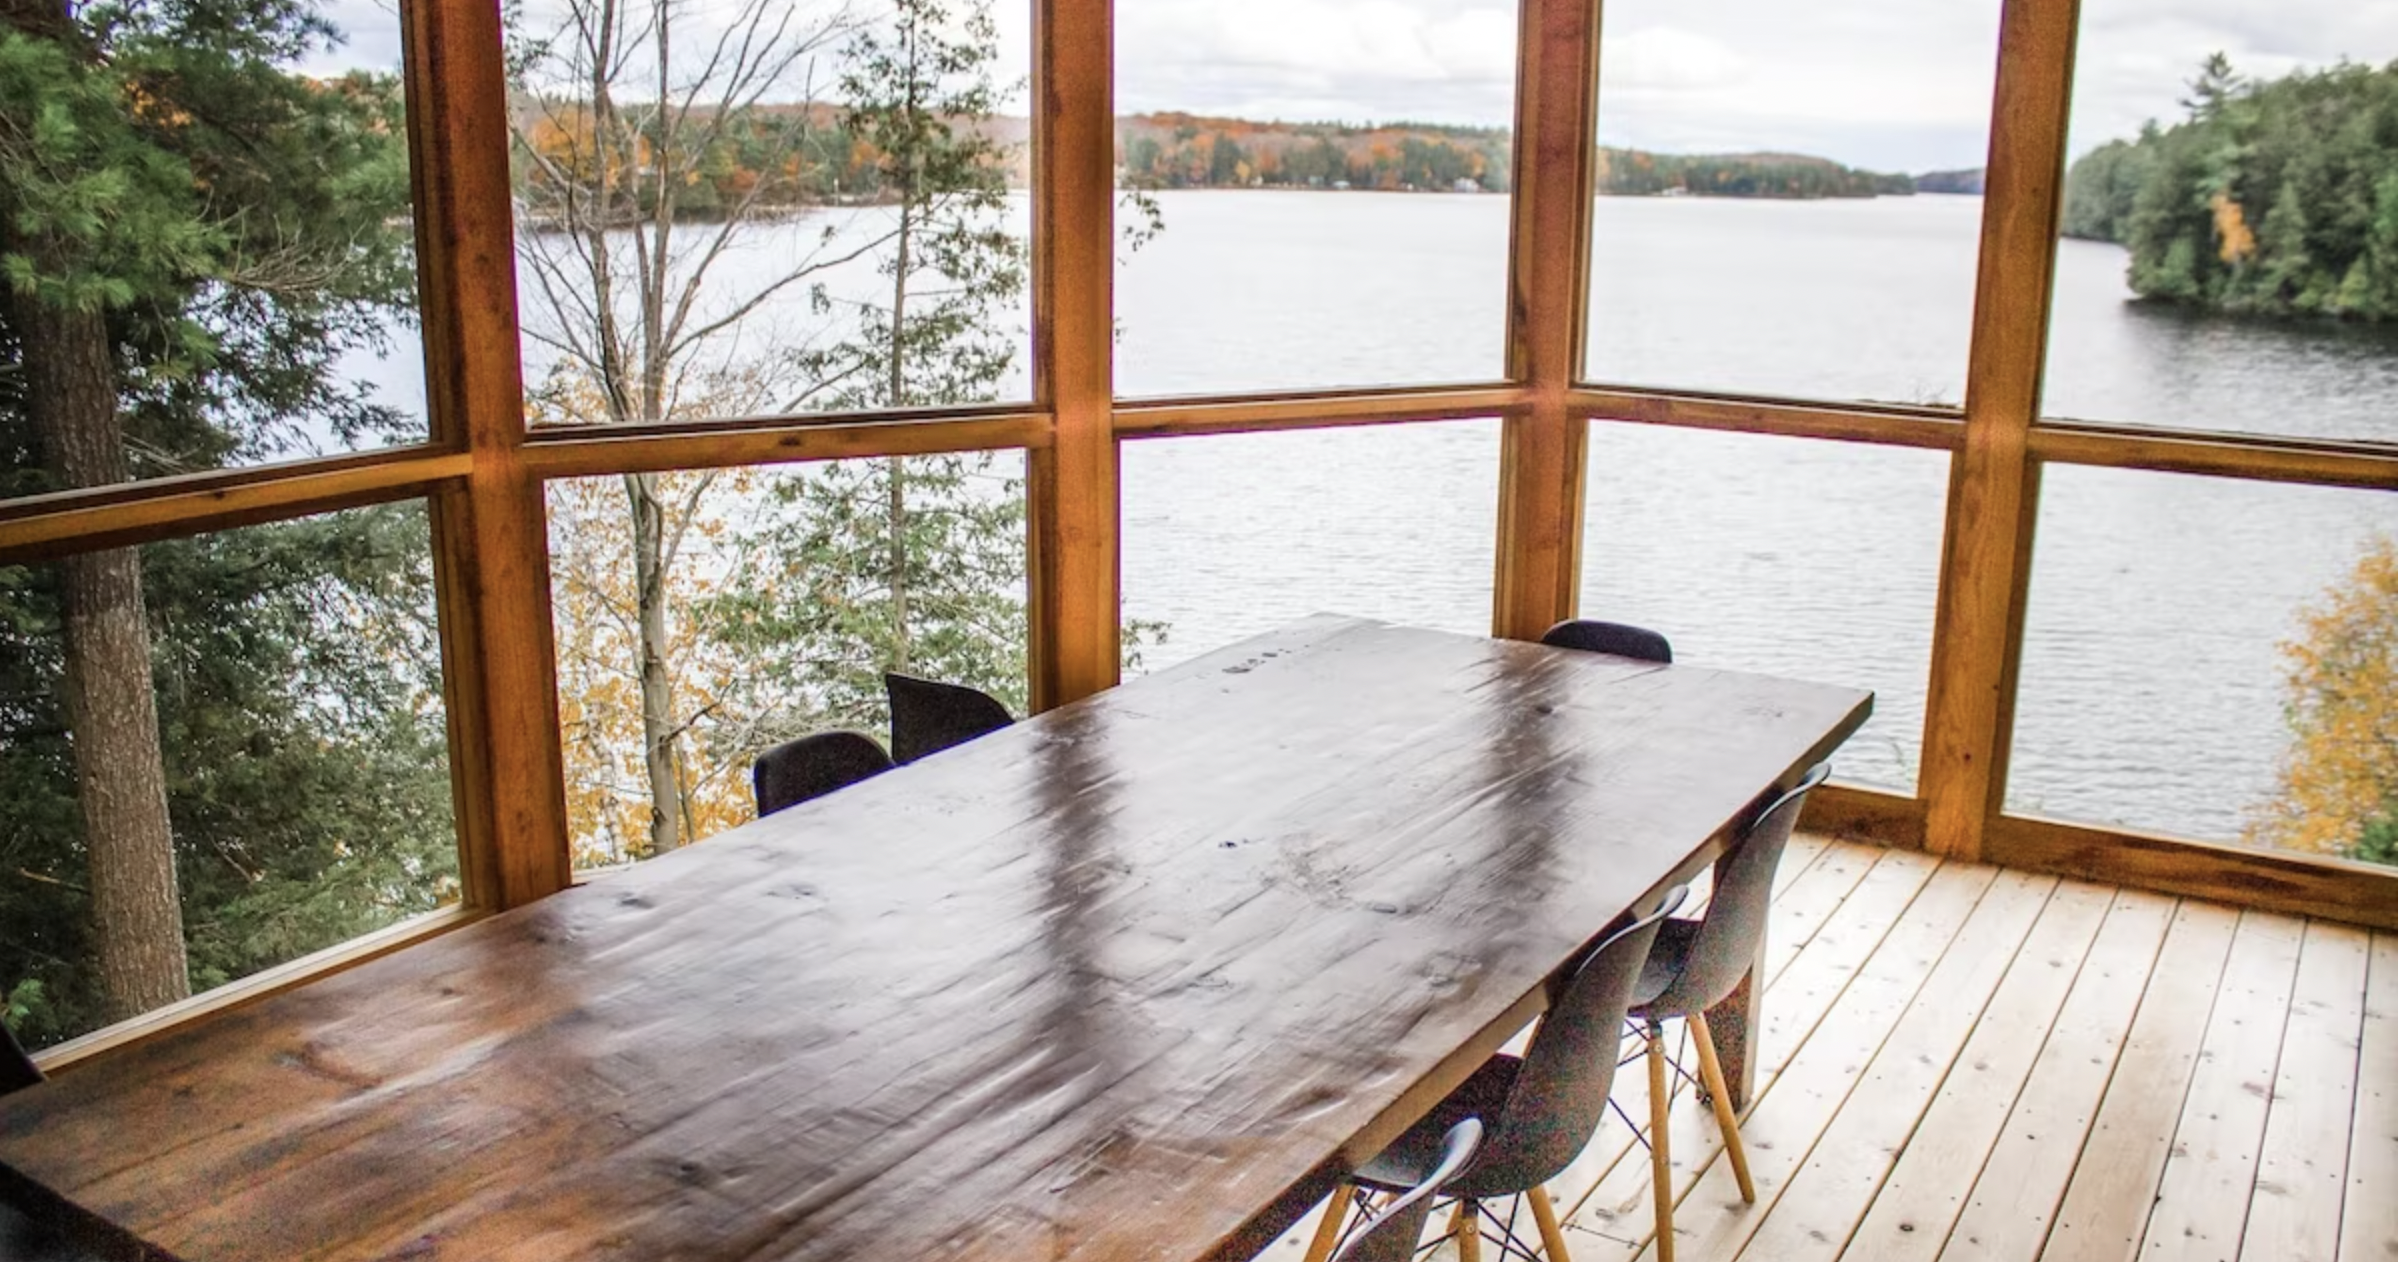 a wood table with chairs around it in a room with window walls looking out over the lake